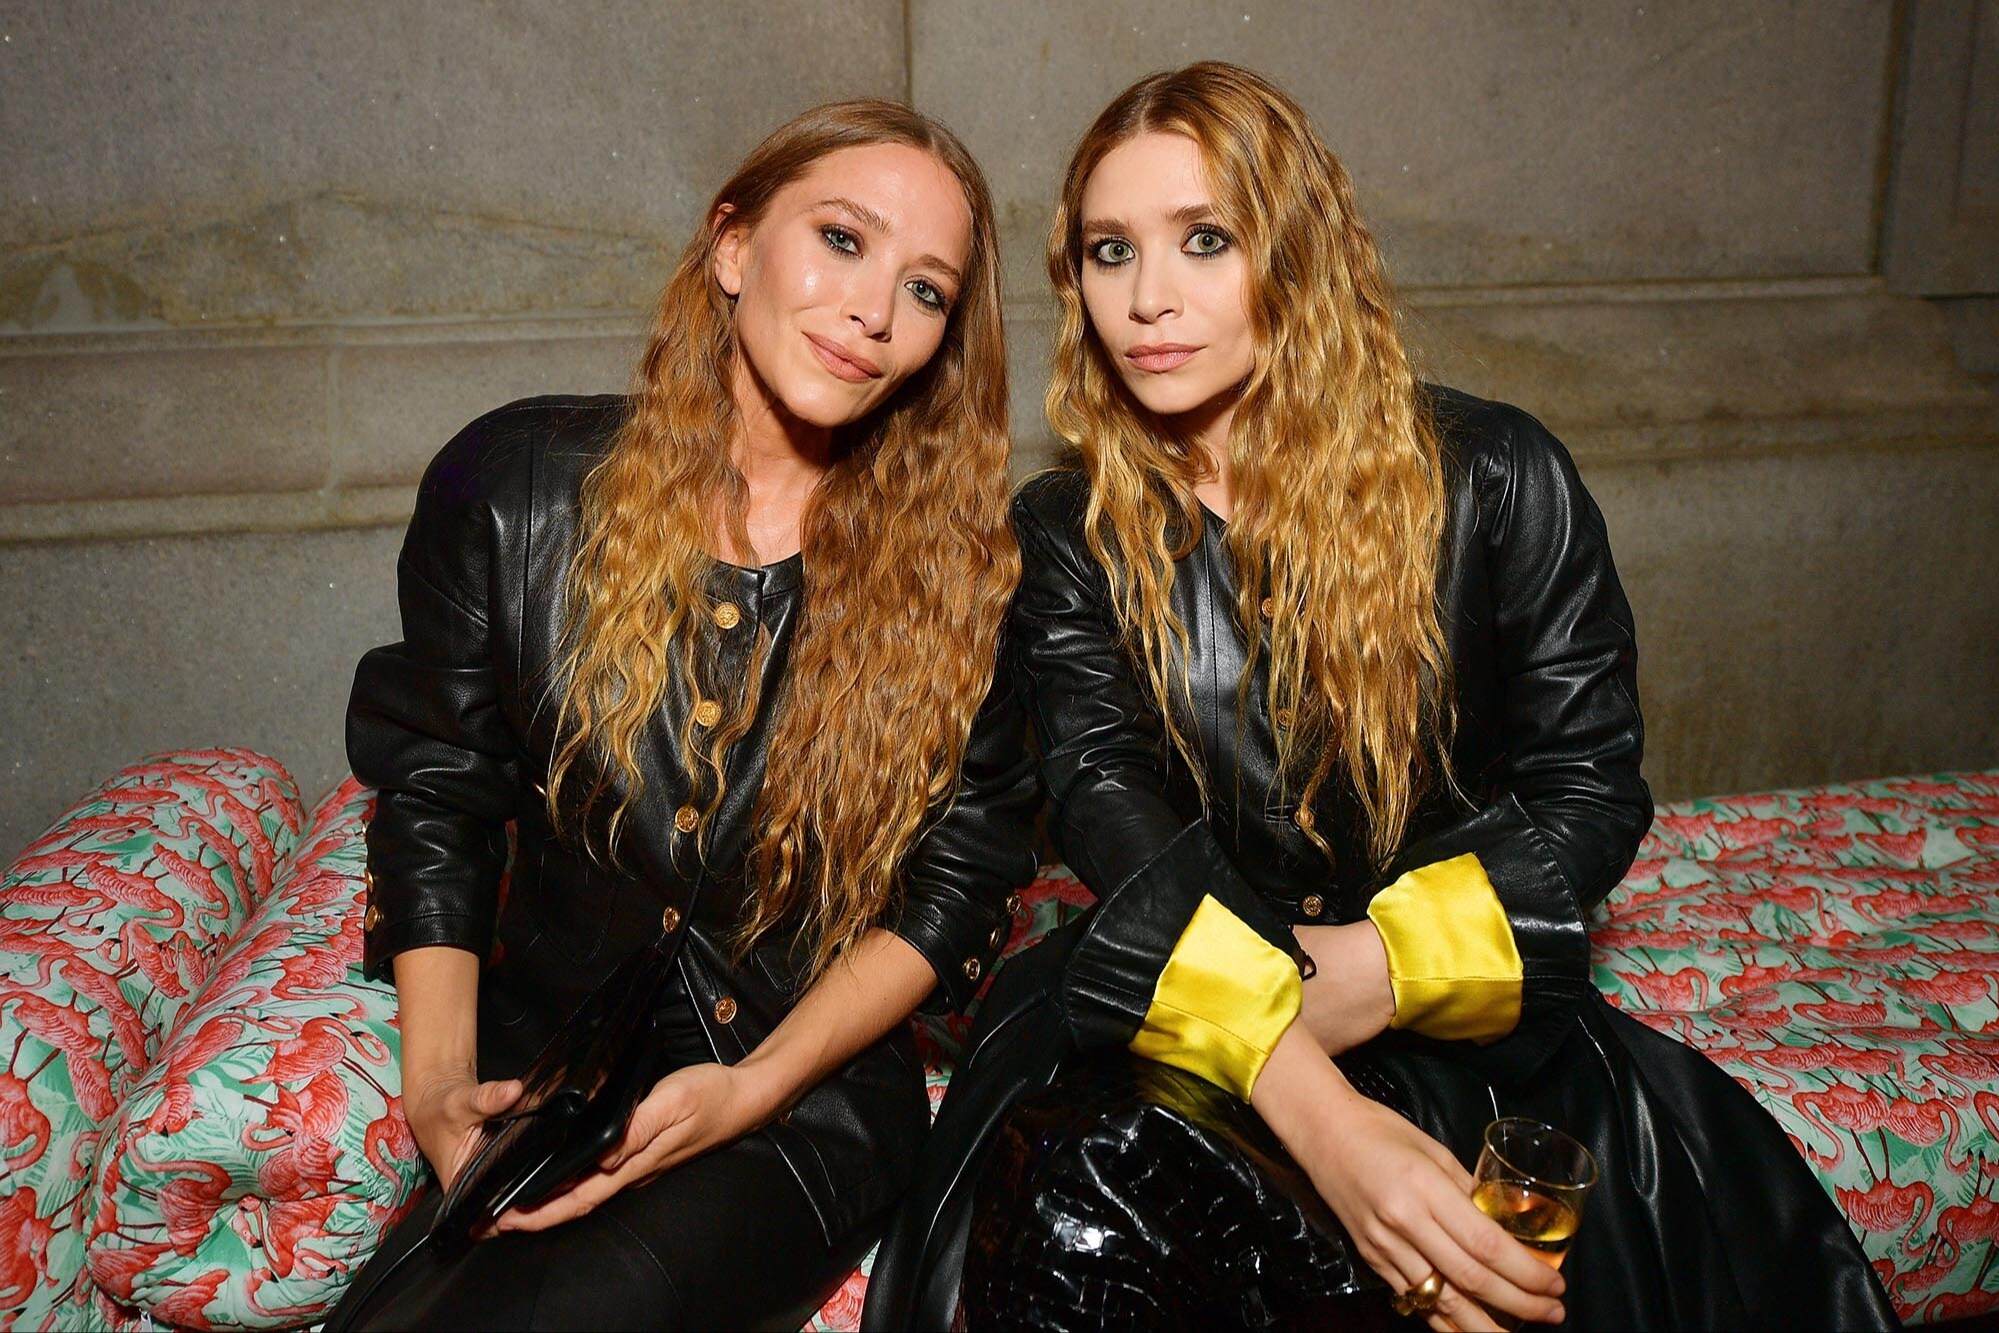 Brand founders Mary Kate and Ashley Olsen